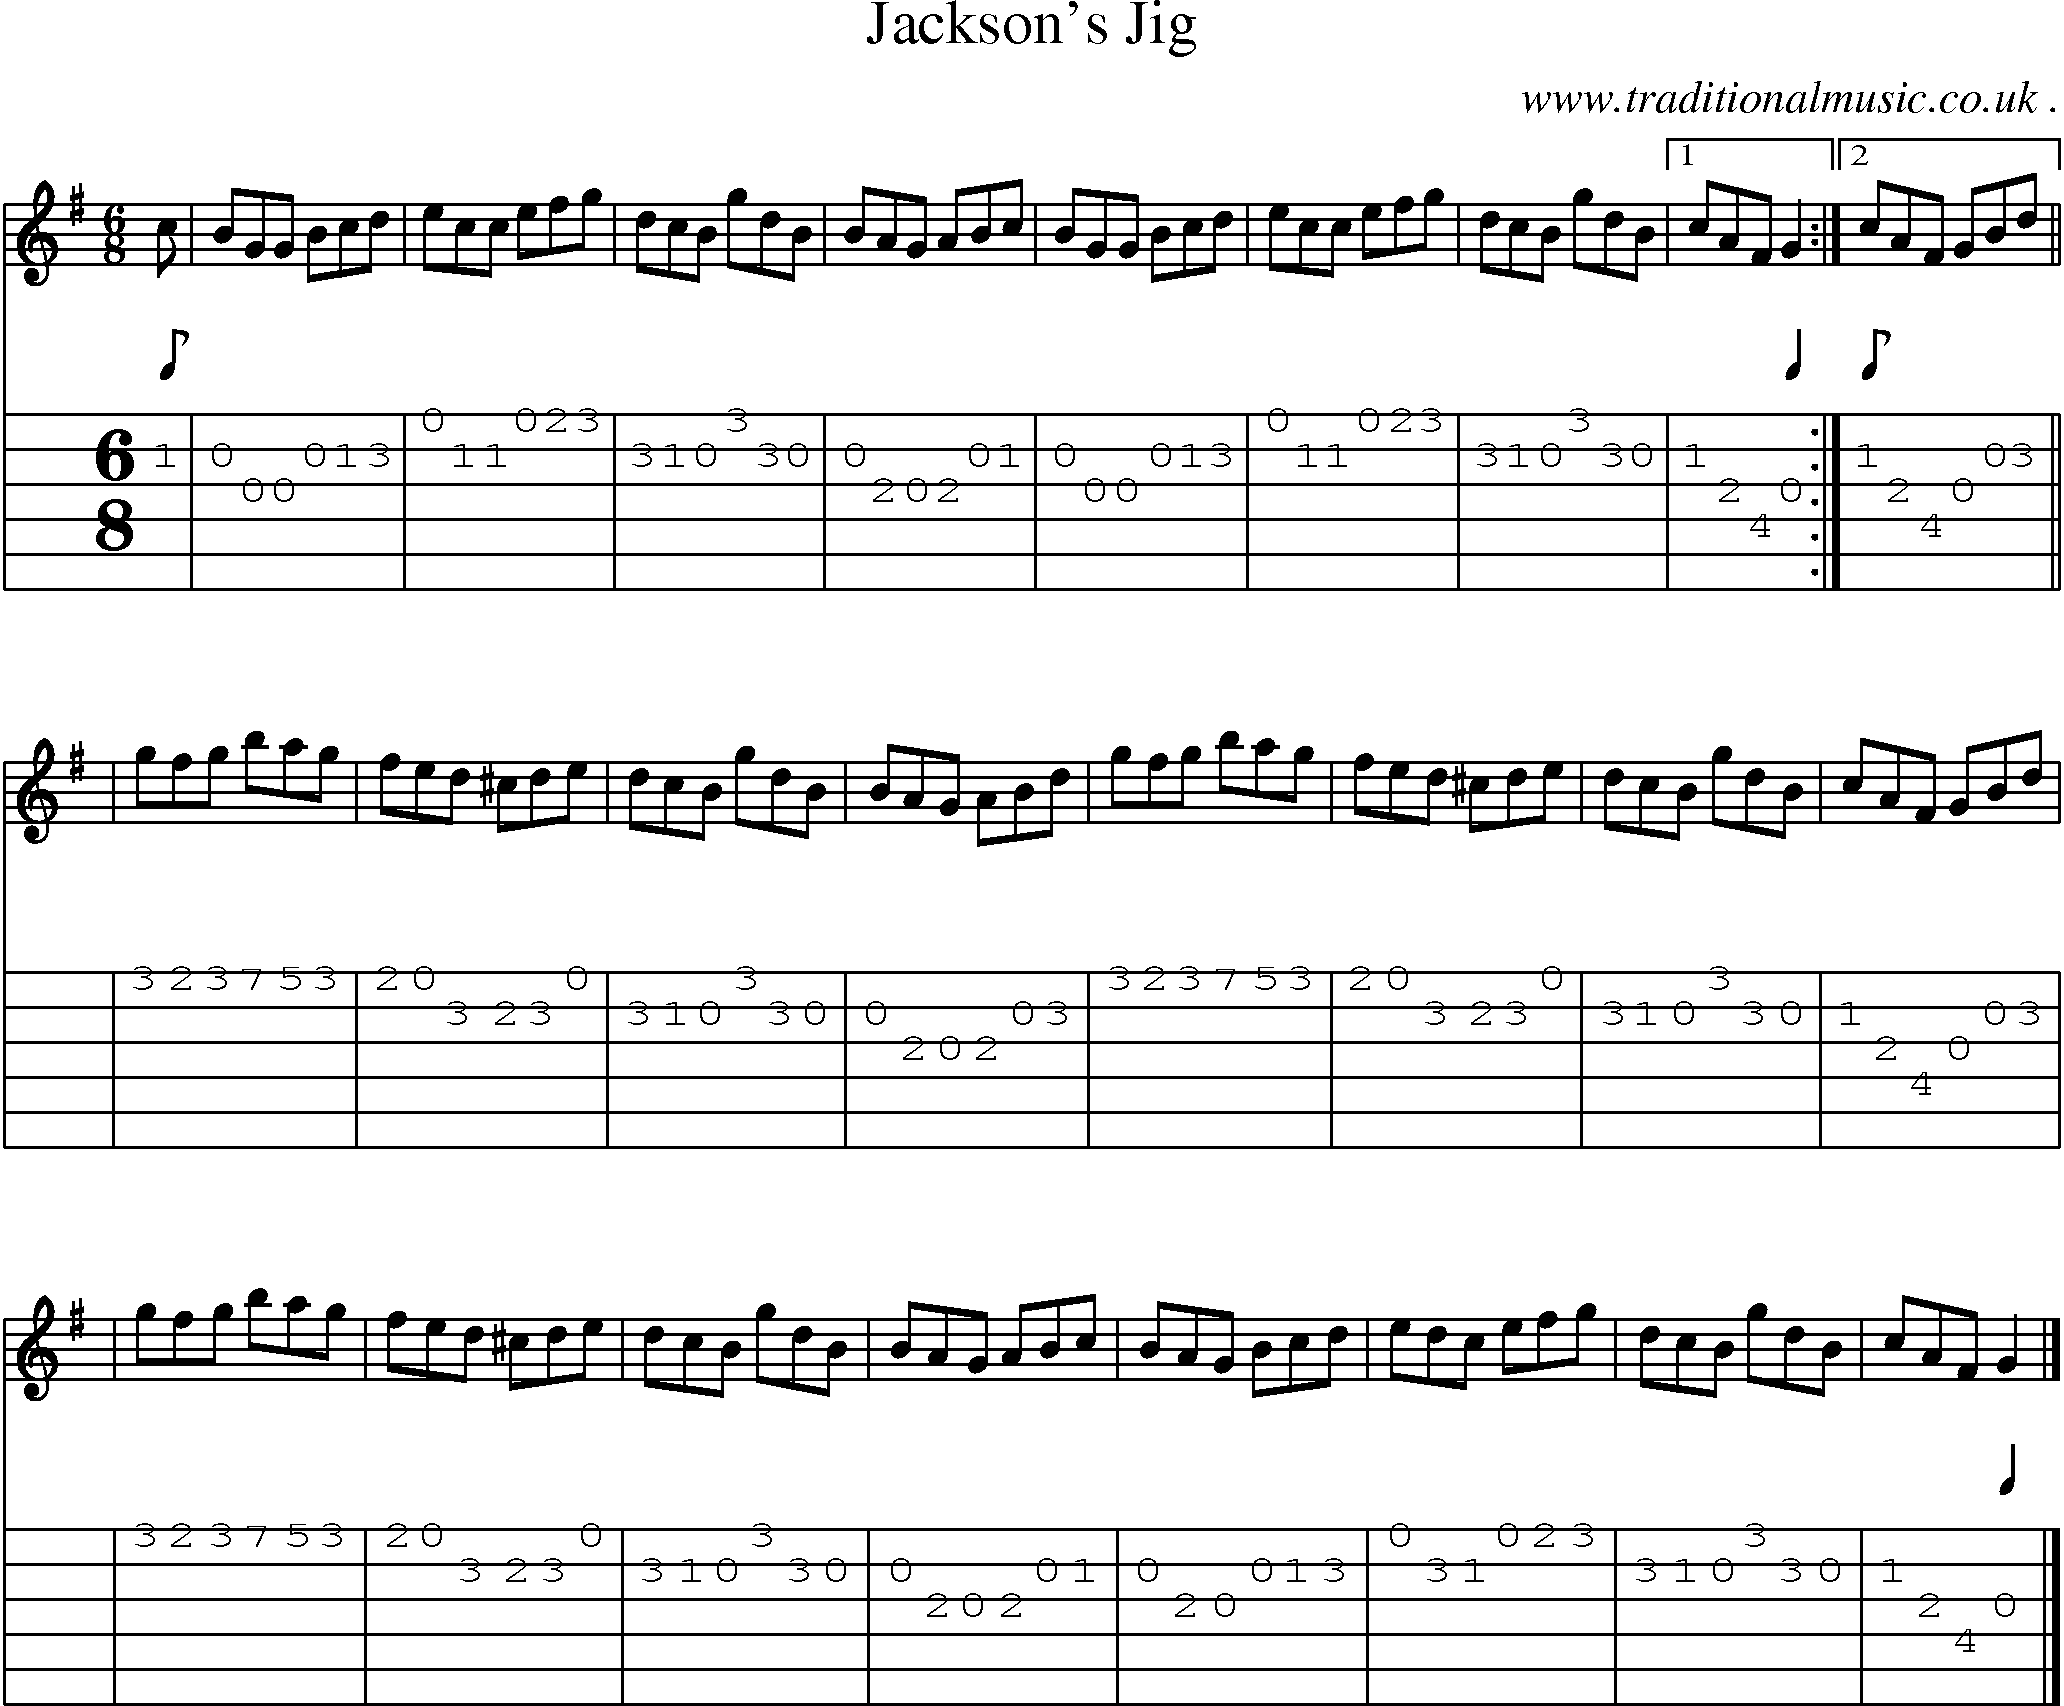 Sheet-music  score, Chords and Guitar Tabs for Jacksons Jig